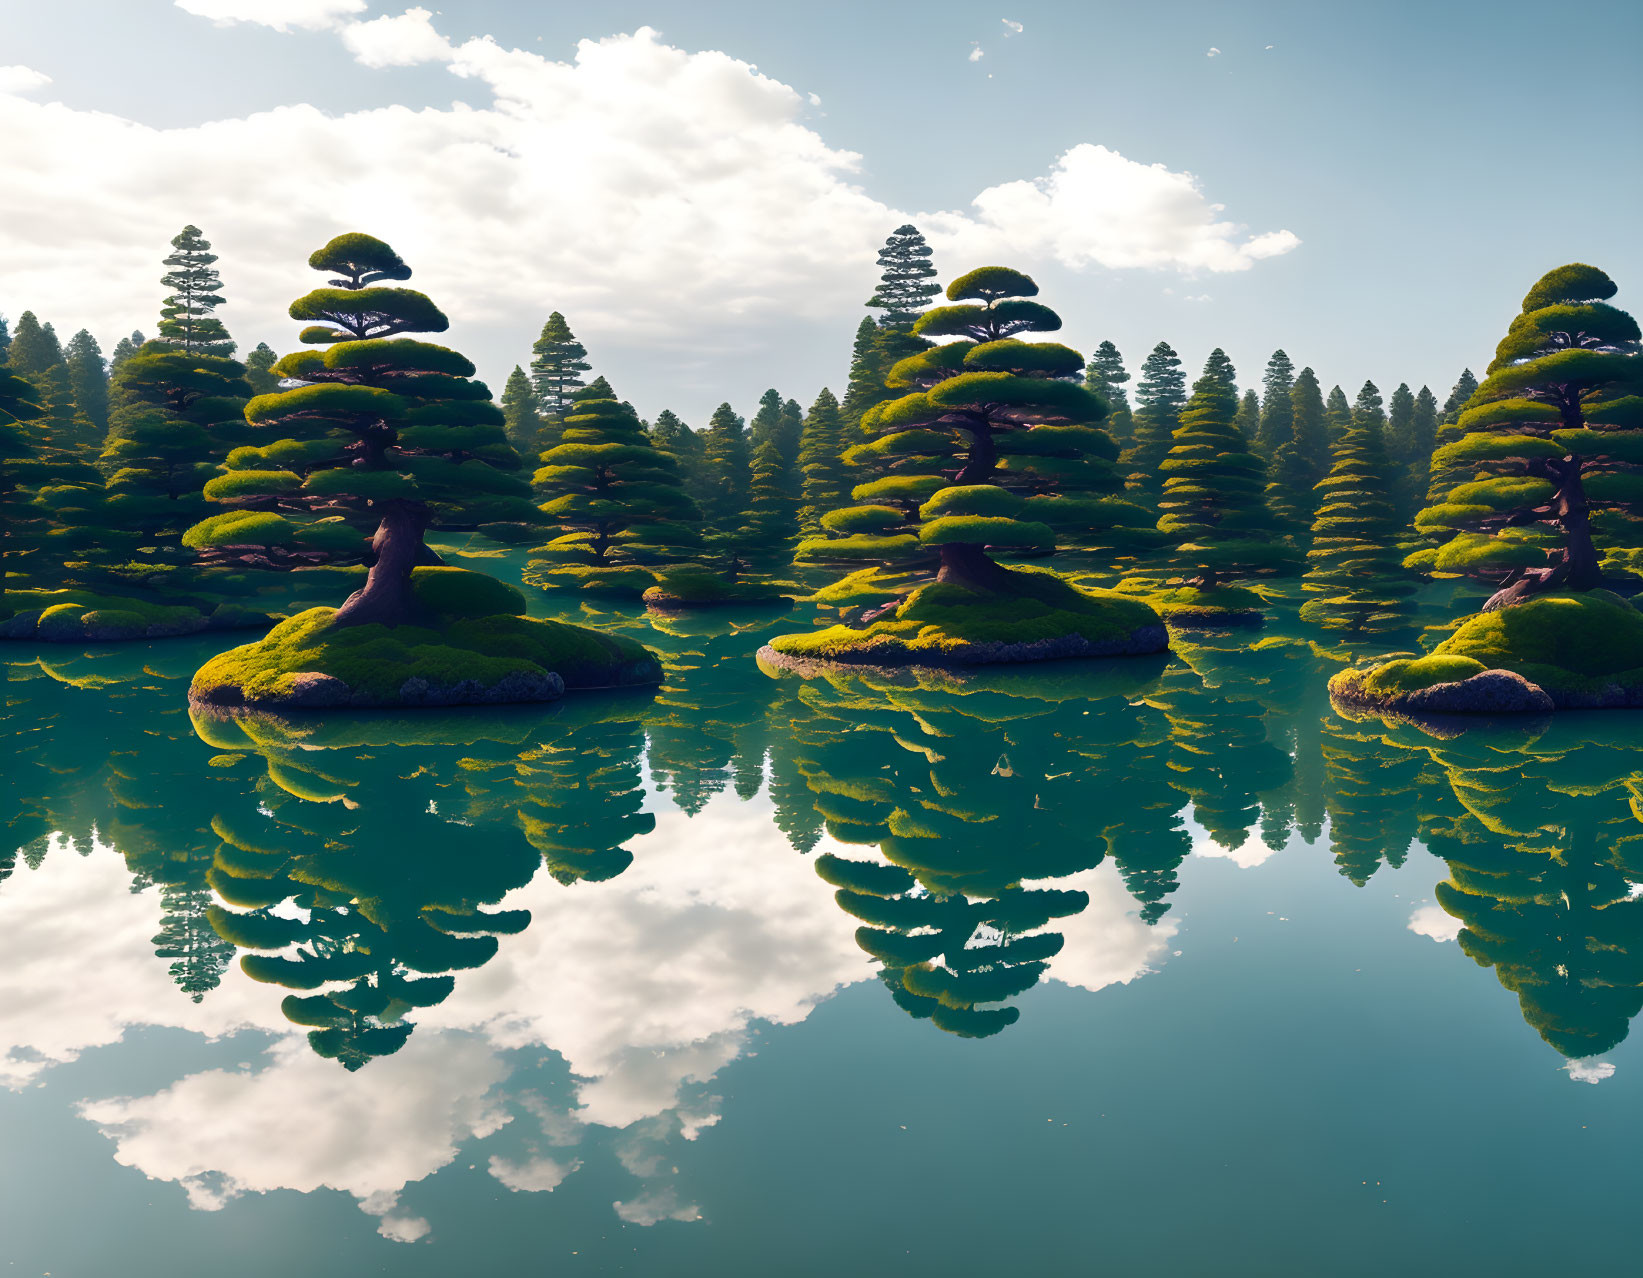 Surreal tree-covered islands reflected in calm lake